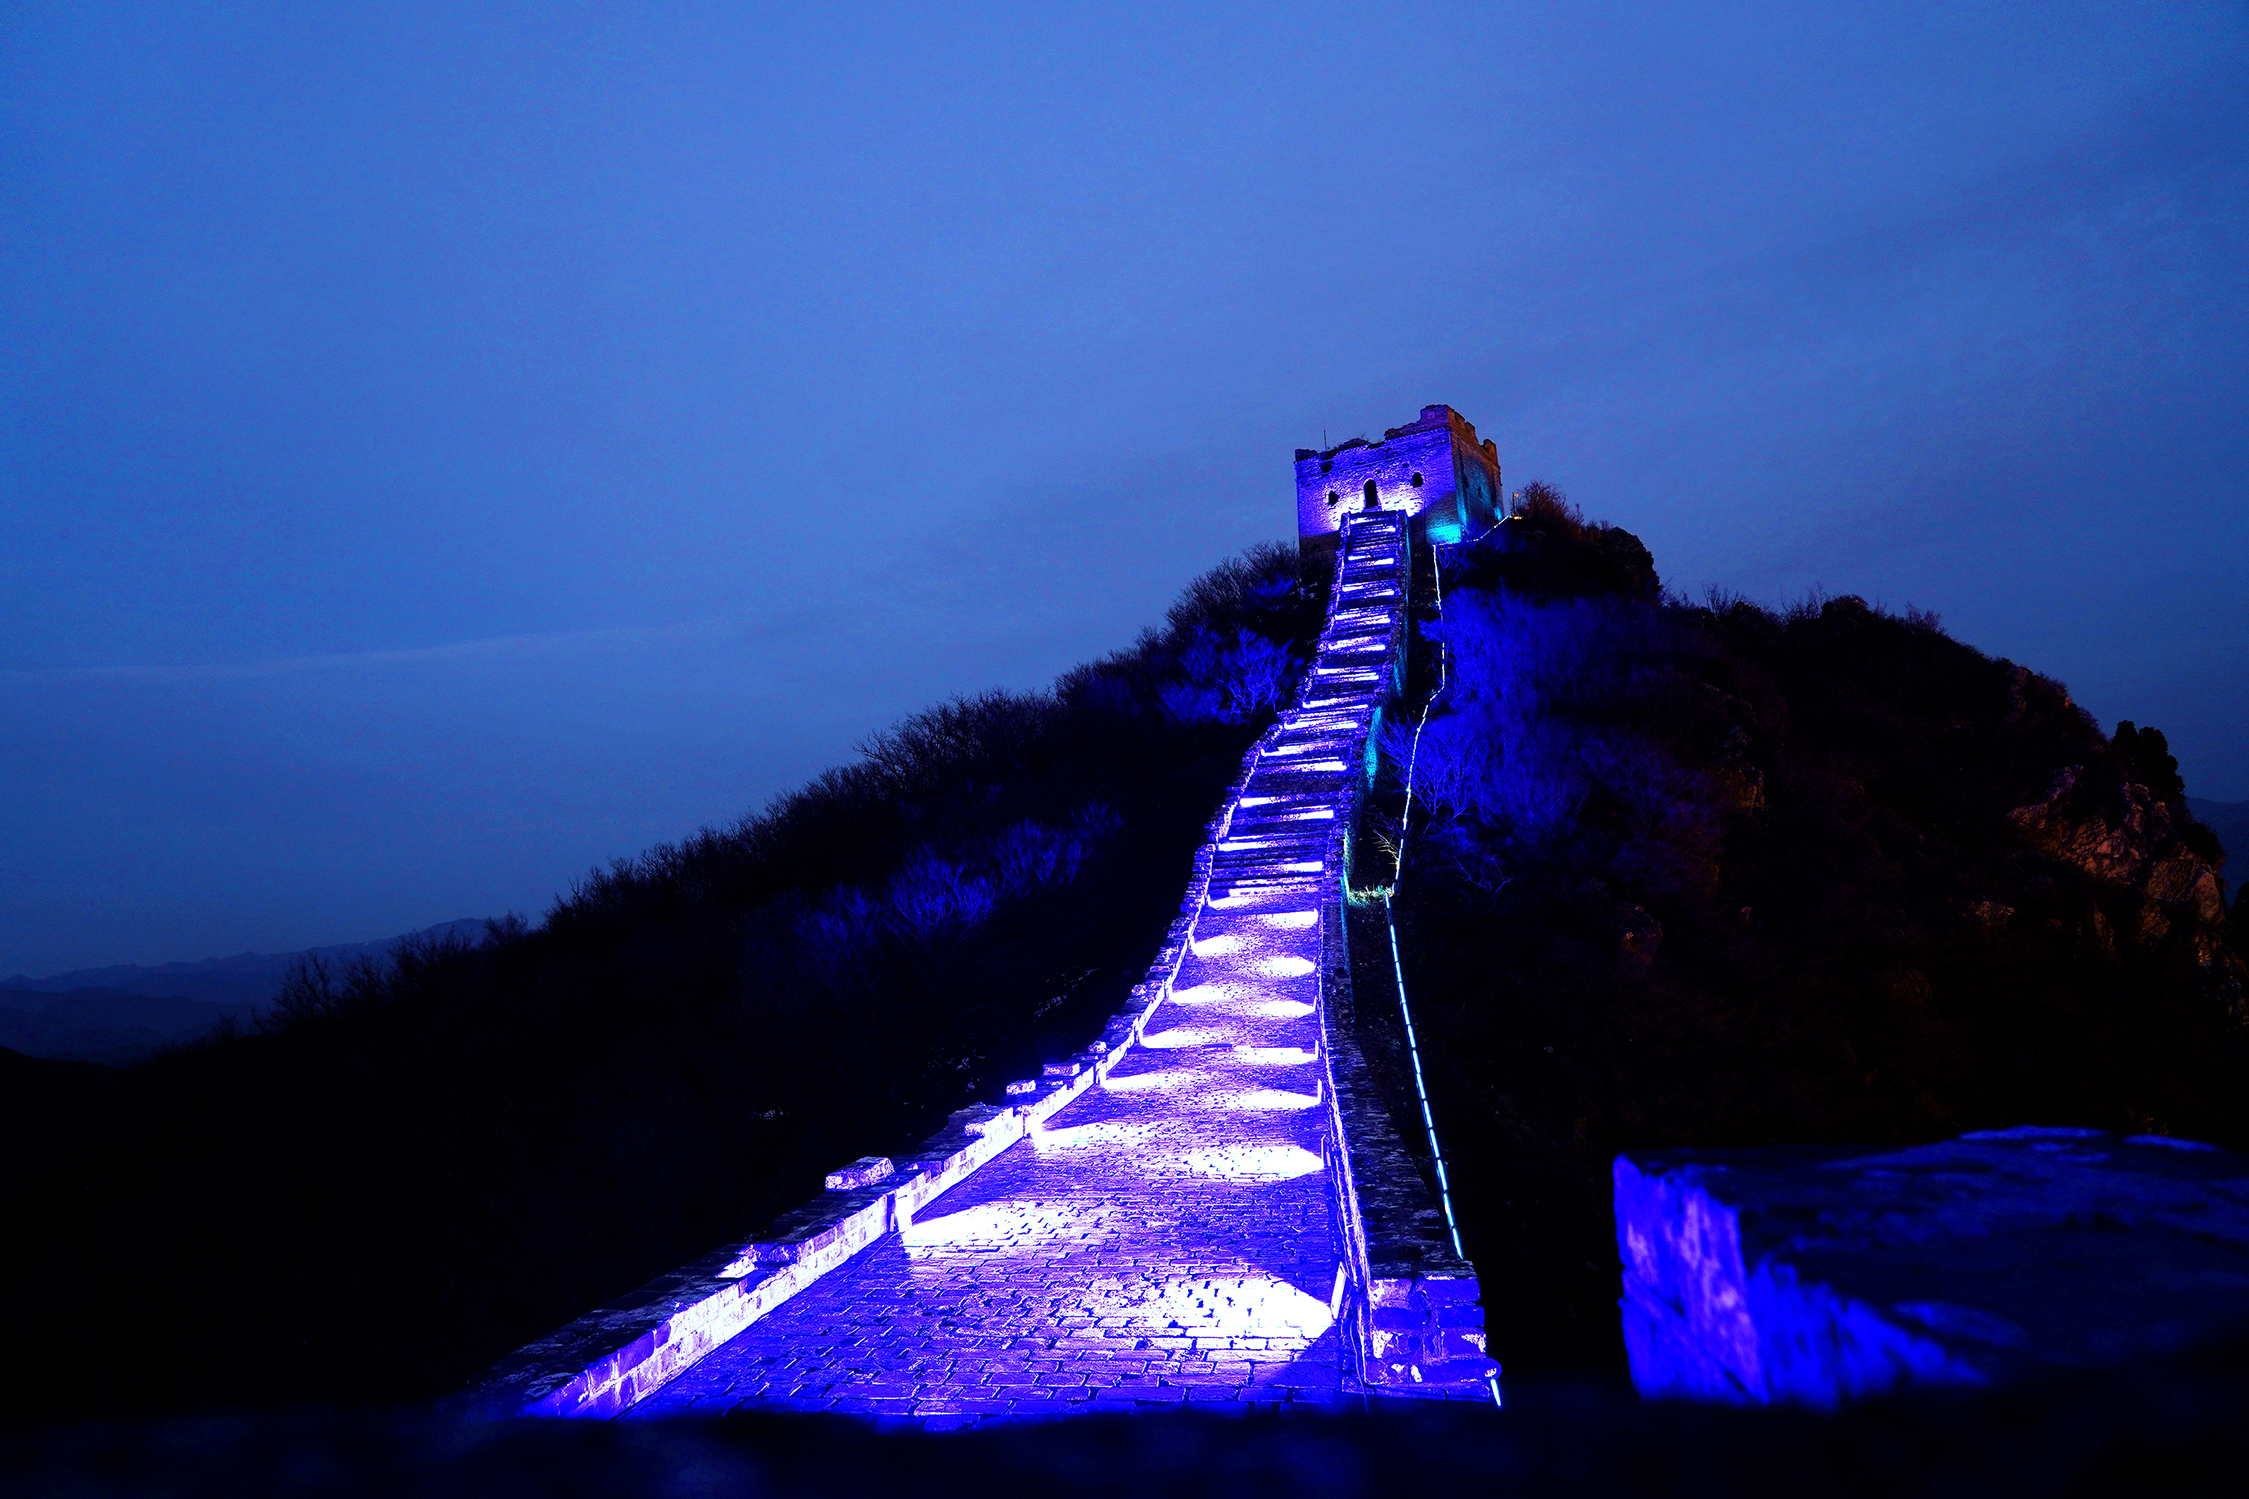 A section of the Simatai Great Wall in Beijing is lit up in blue to mark World Children’s Day on 20 November 2021. A total of 23 cities lit up in blue iconic buildings and monuments to symbolize their commitment to upholding children's rights.